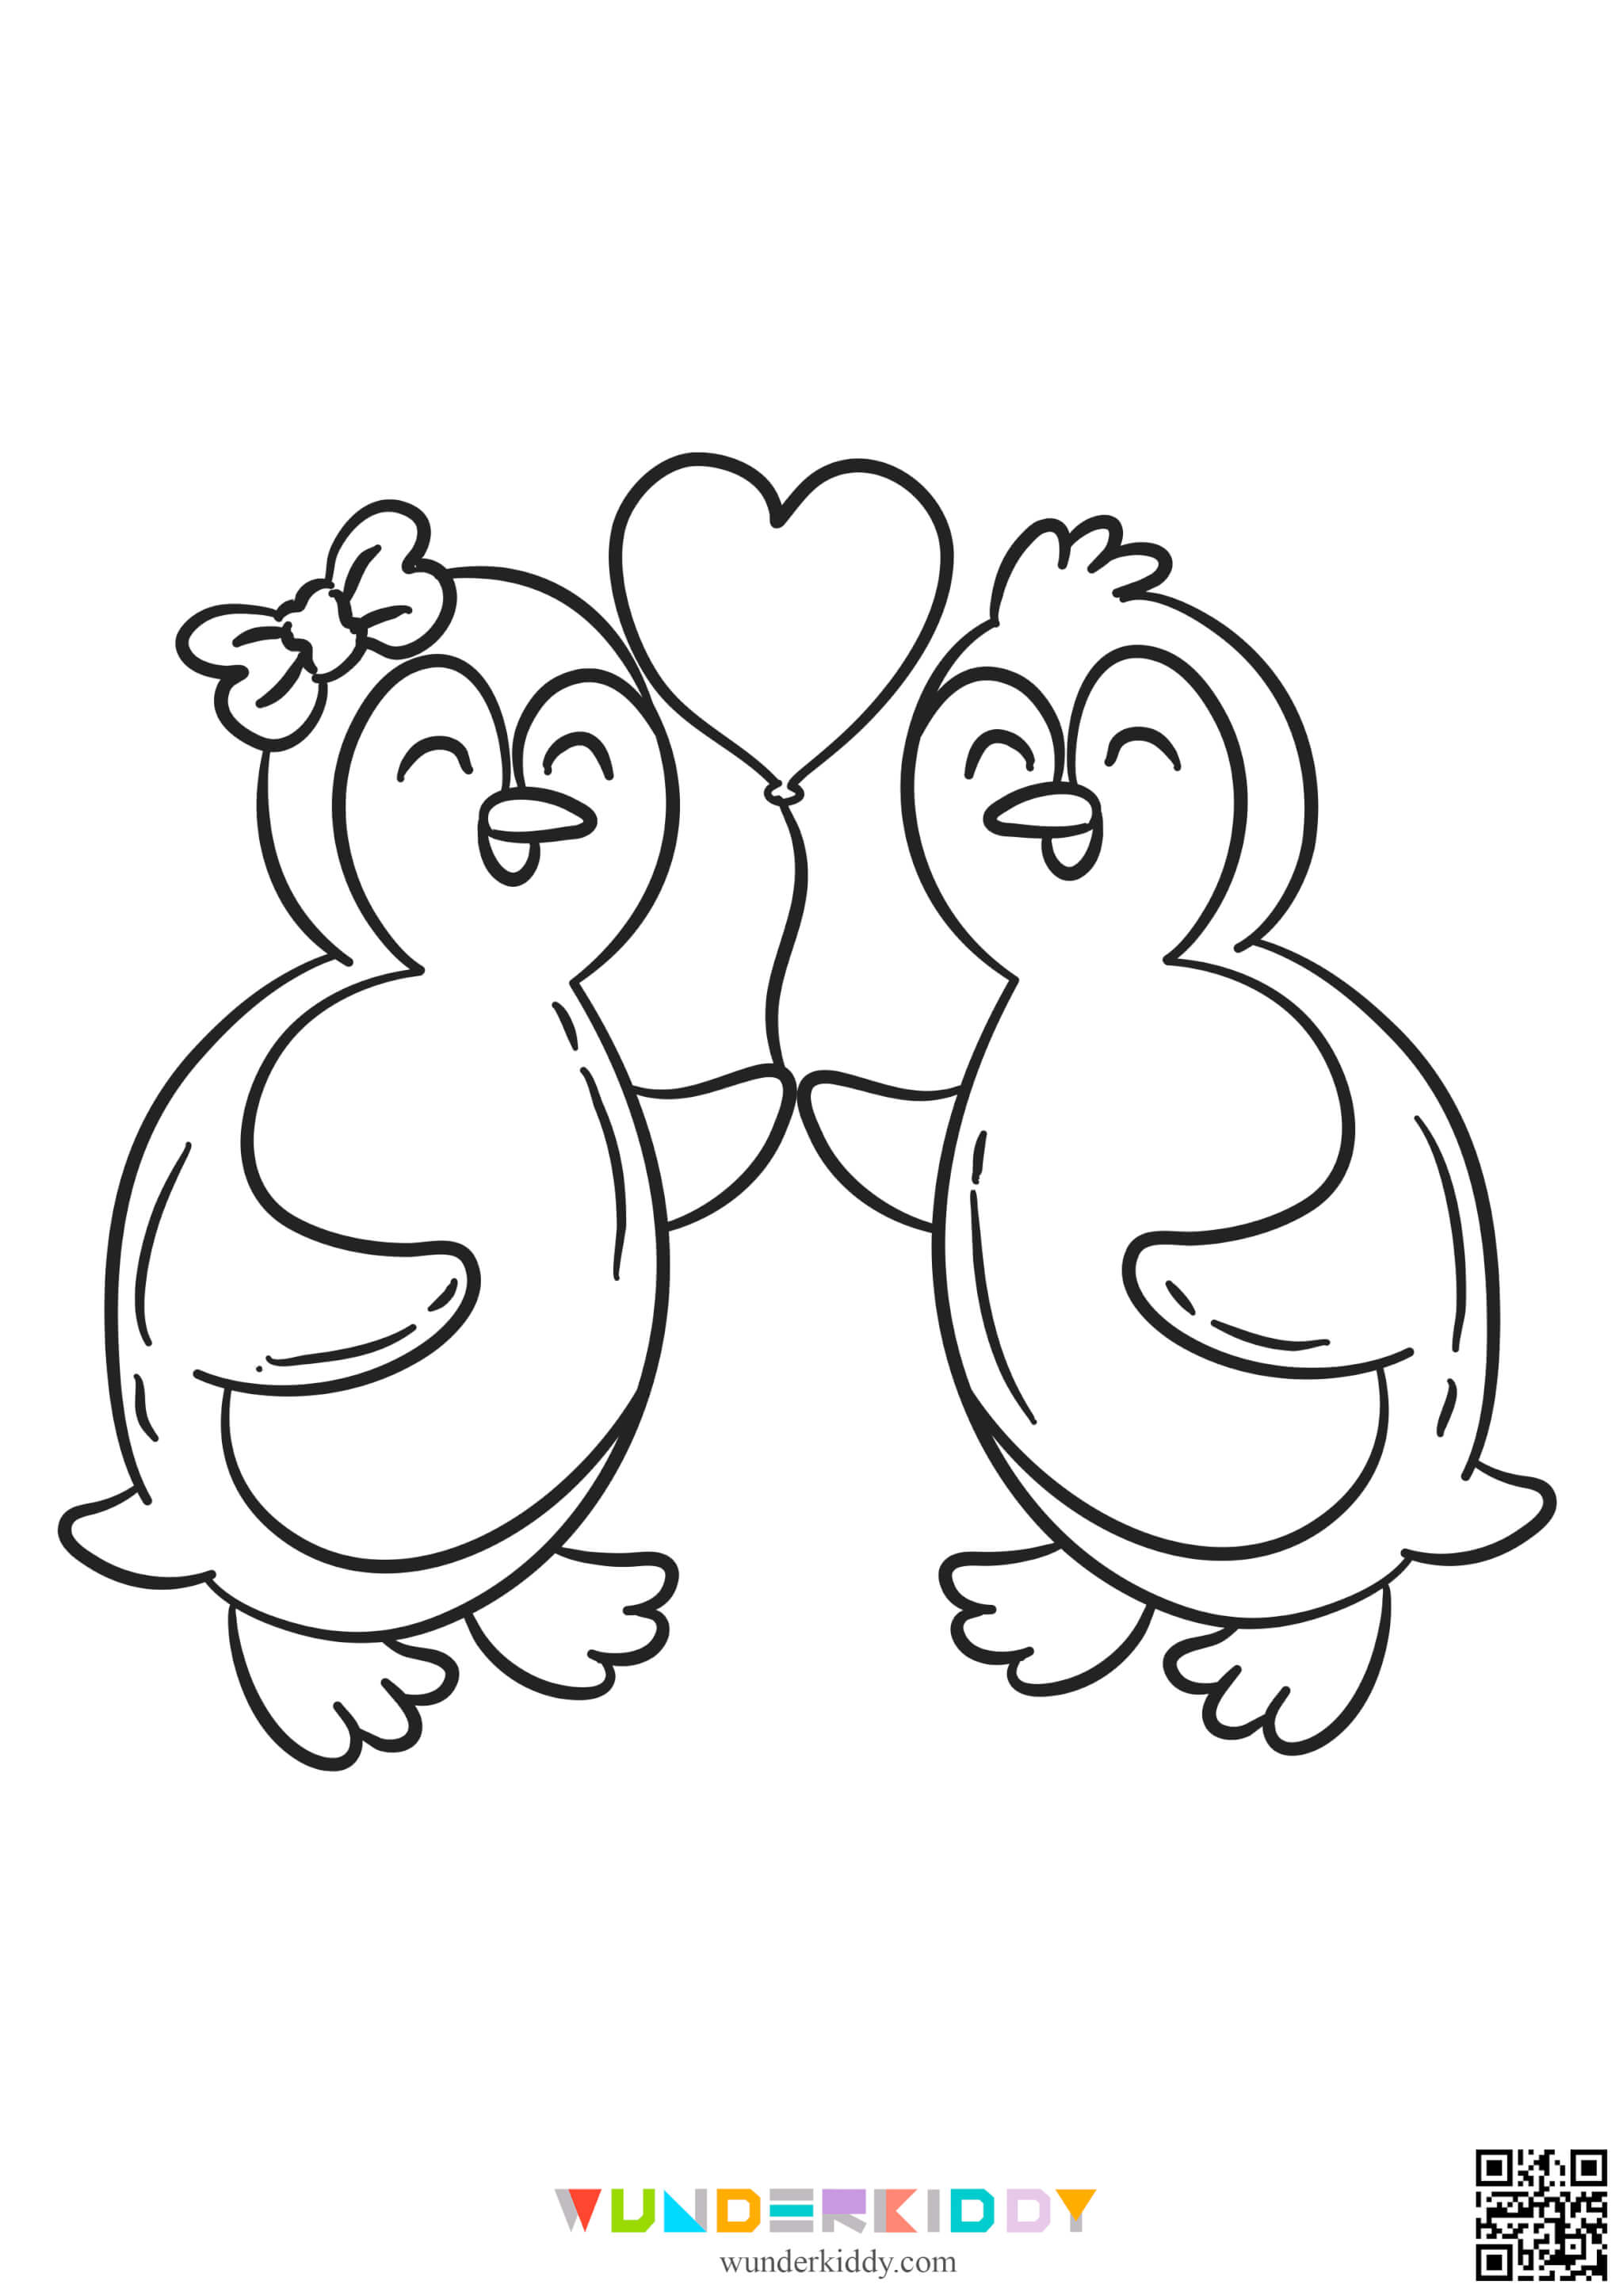 Valentines Coloring Pages - Image 19